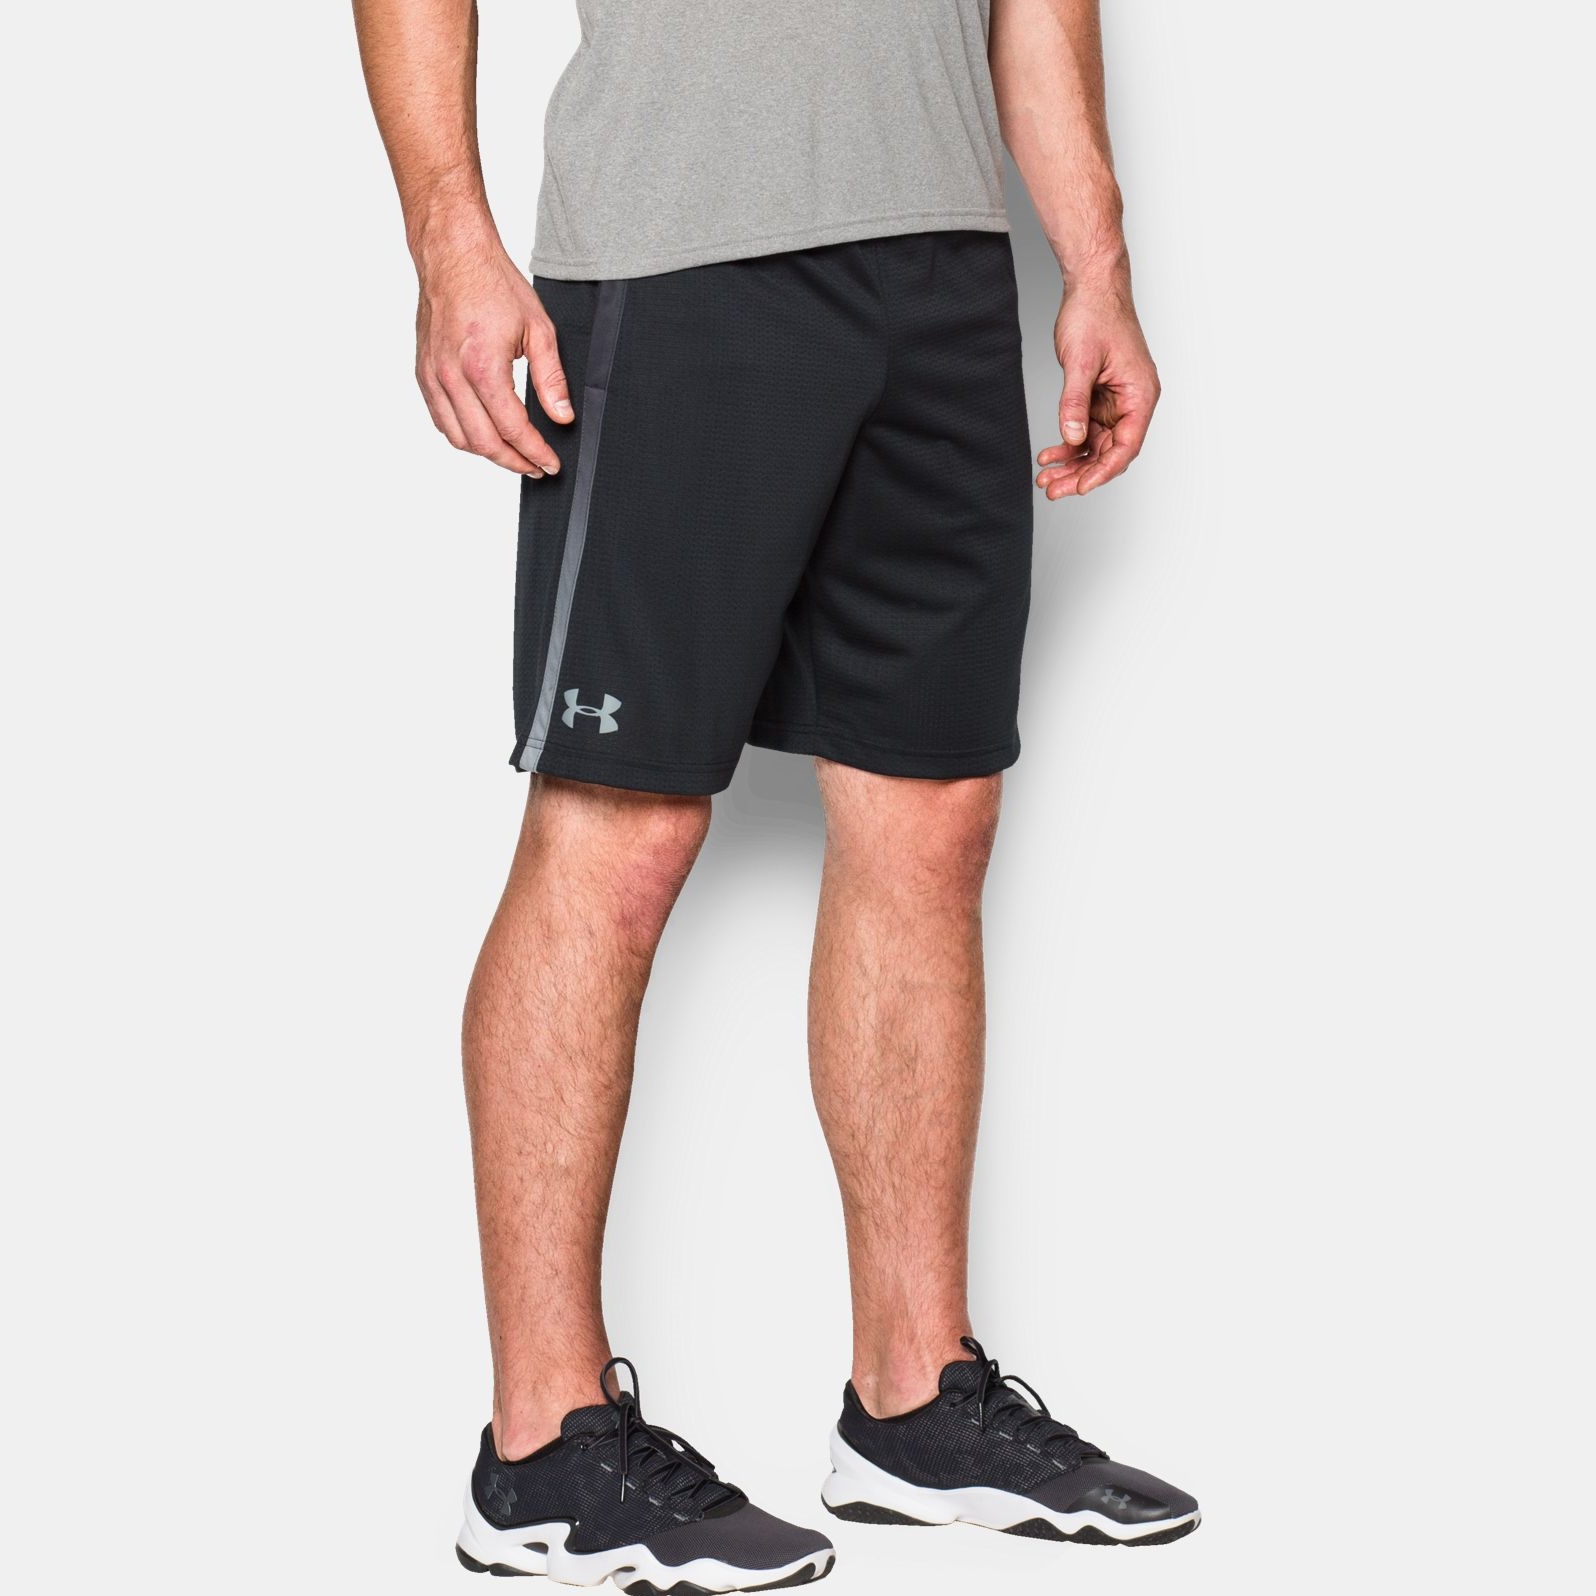 Joggers & Clothing | Under armour Mesh Shorts 1940 | Fitness